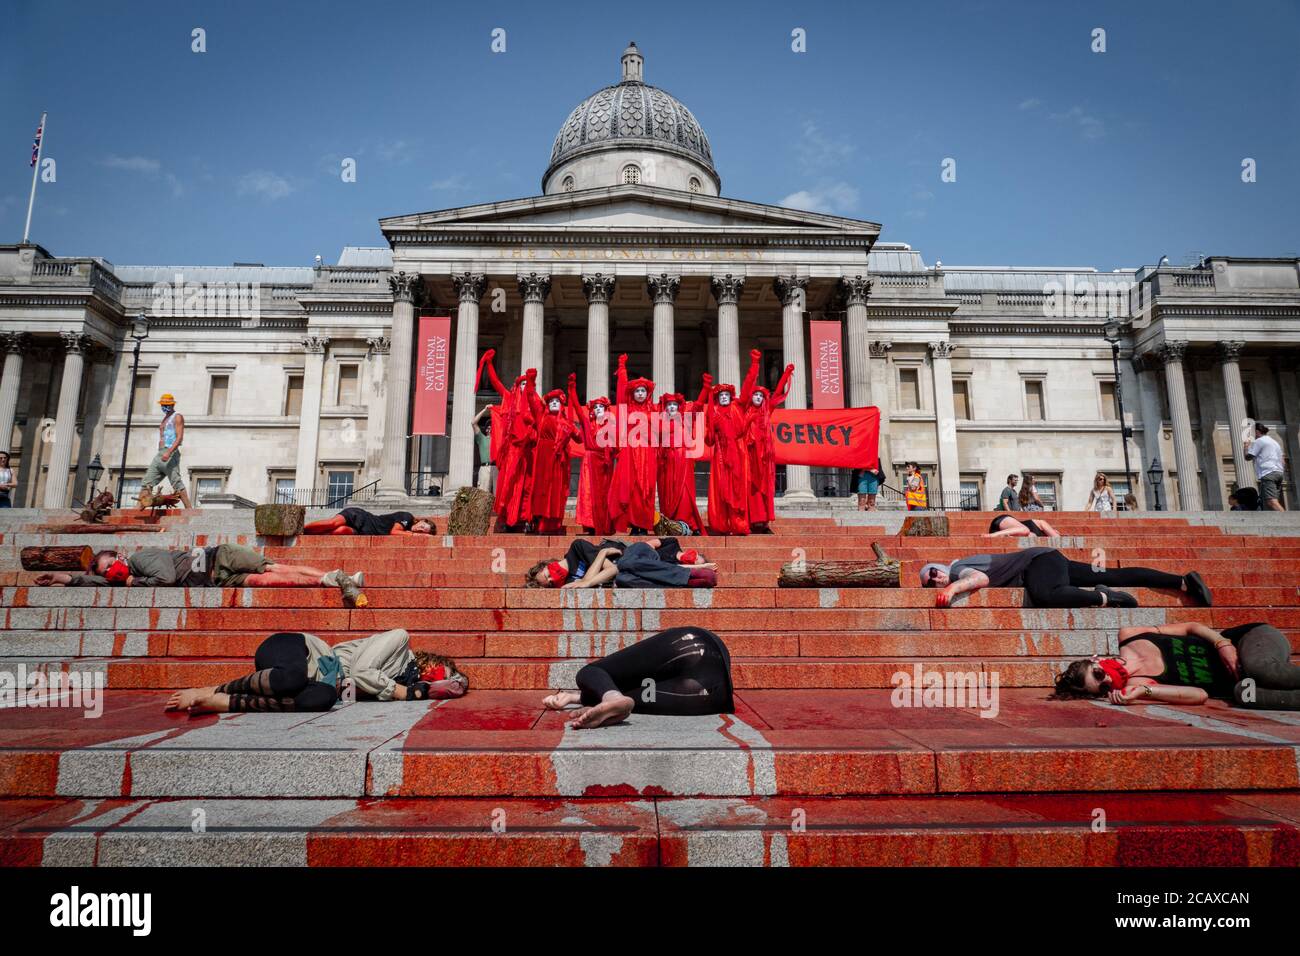 London, United Kingdom, Aug 09 2020: Extinction Rebellion Activists cover of `fake blood the stairs of trafalgar sq for International Day of the World Stock Photo